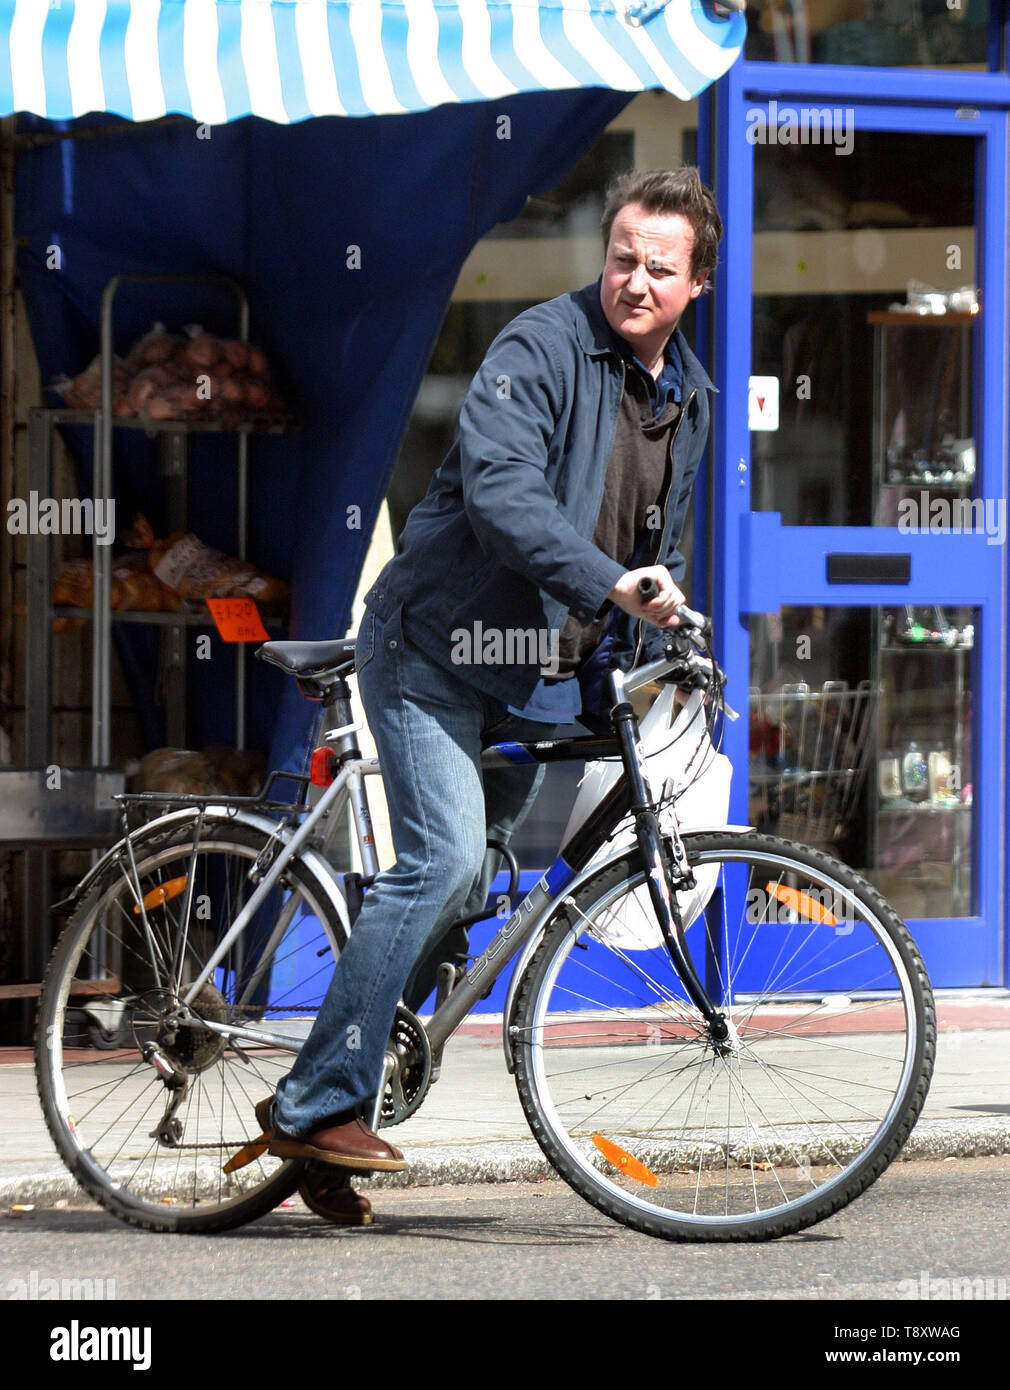 David Cameron is clearly a man of his word as he uses his bike to do the family grocery shopping at his local shops. Clearly not for Mr. Cameron is the 'celebrity style' supermarket style deliveries as the 'modern man' loads his bike in a true left/right balancing act as he swung to right infront of a juuggernaut! Next time maybe a set of cycling safety gear might be appropriate. Picture by Tony Henshaw Stock Photo